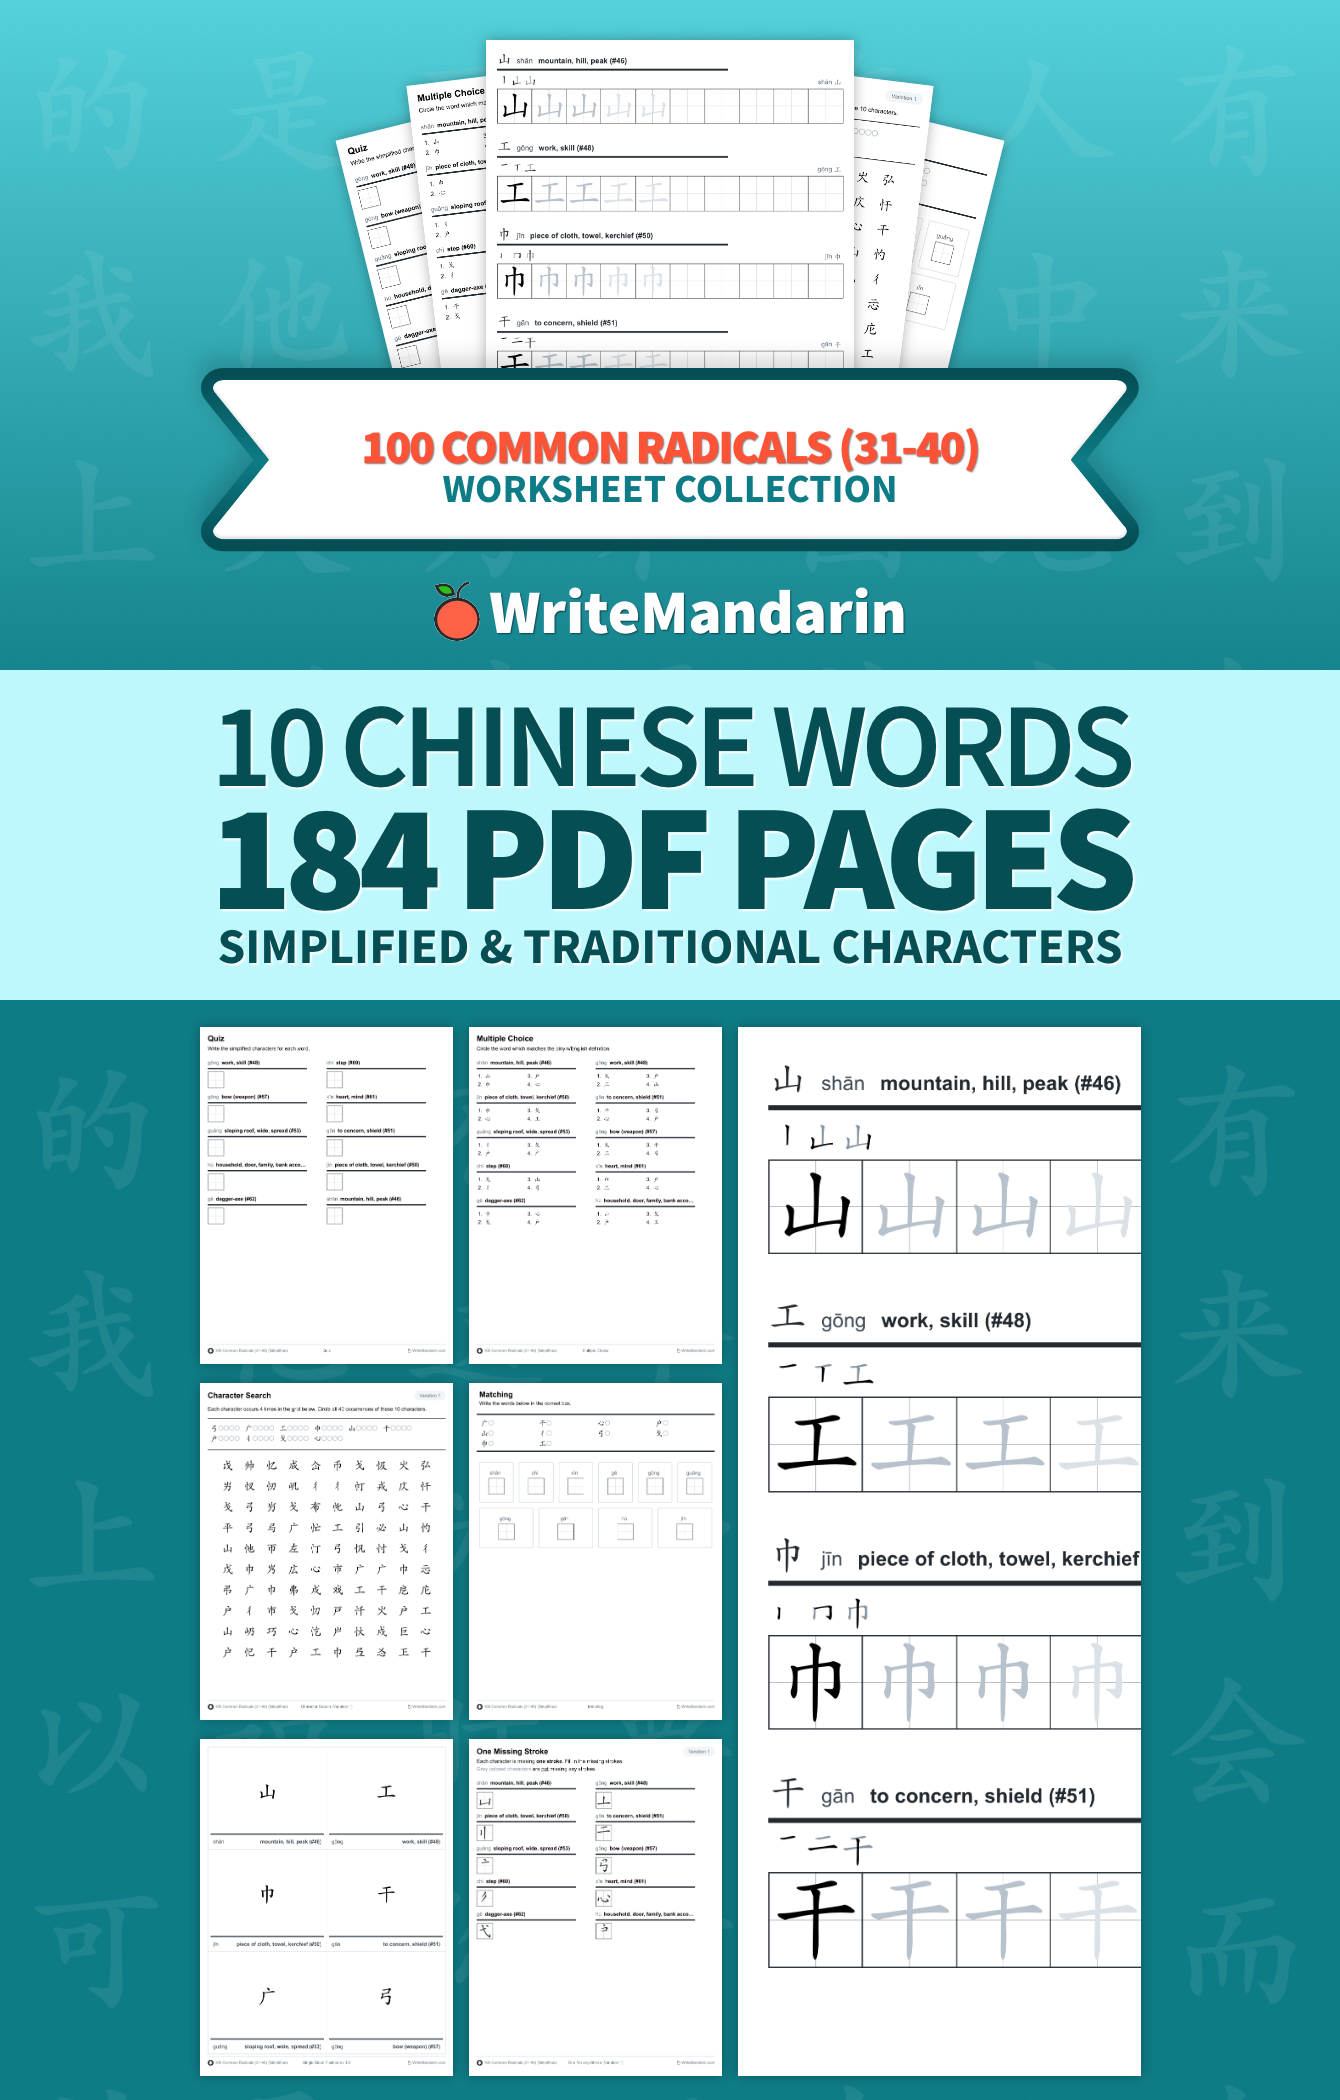 Preview image of 100 Common Radicals (31-40) worksheet collection